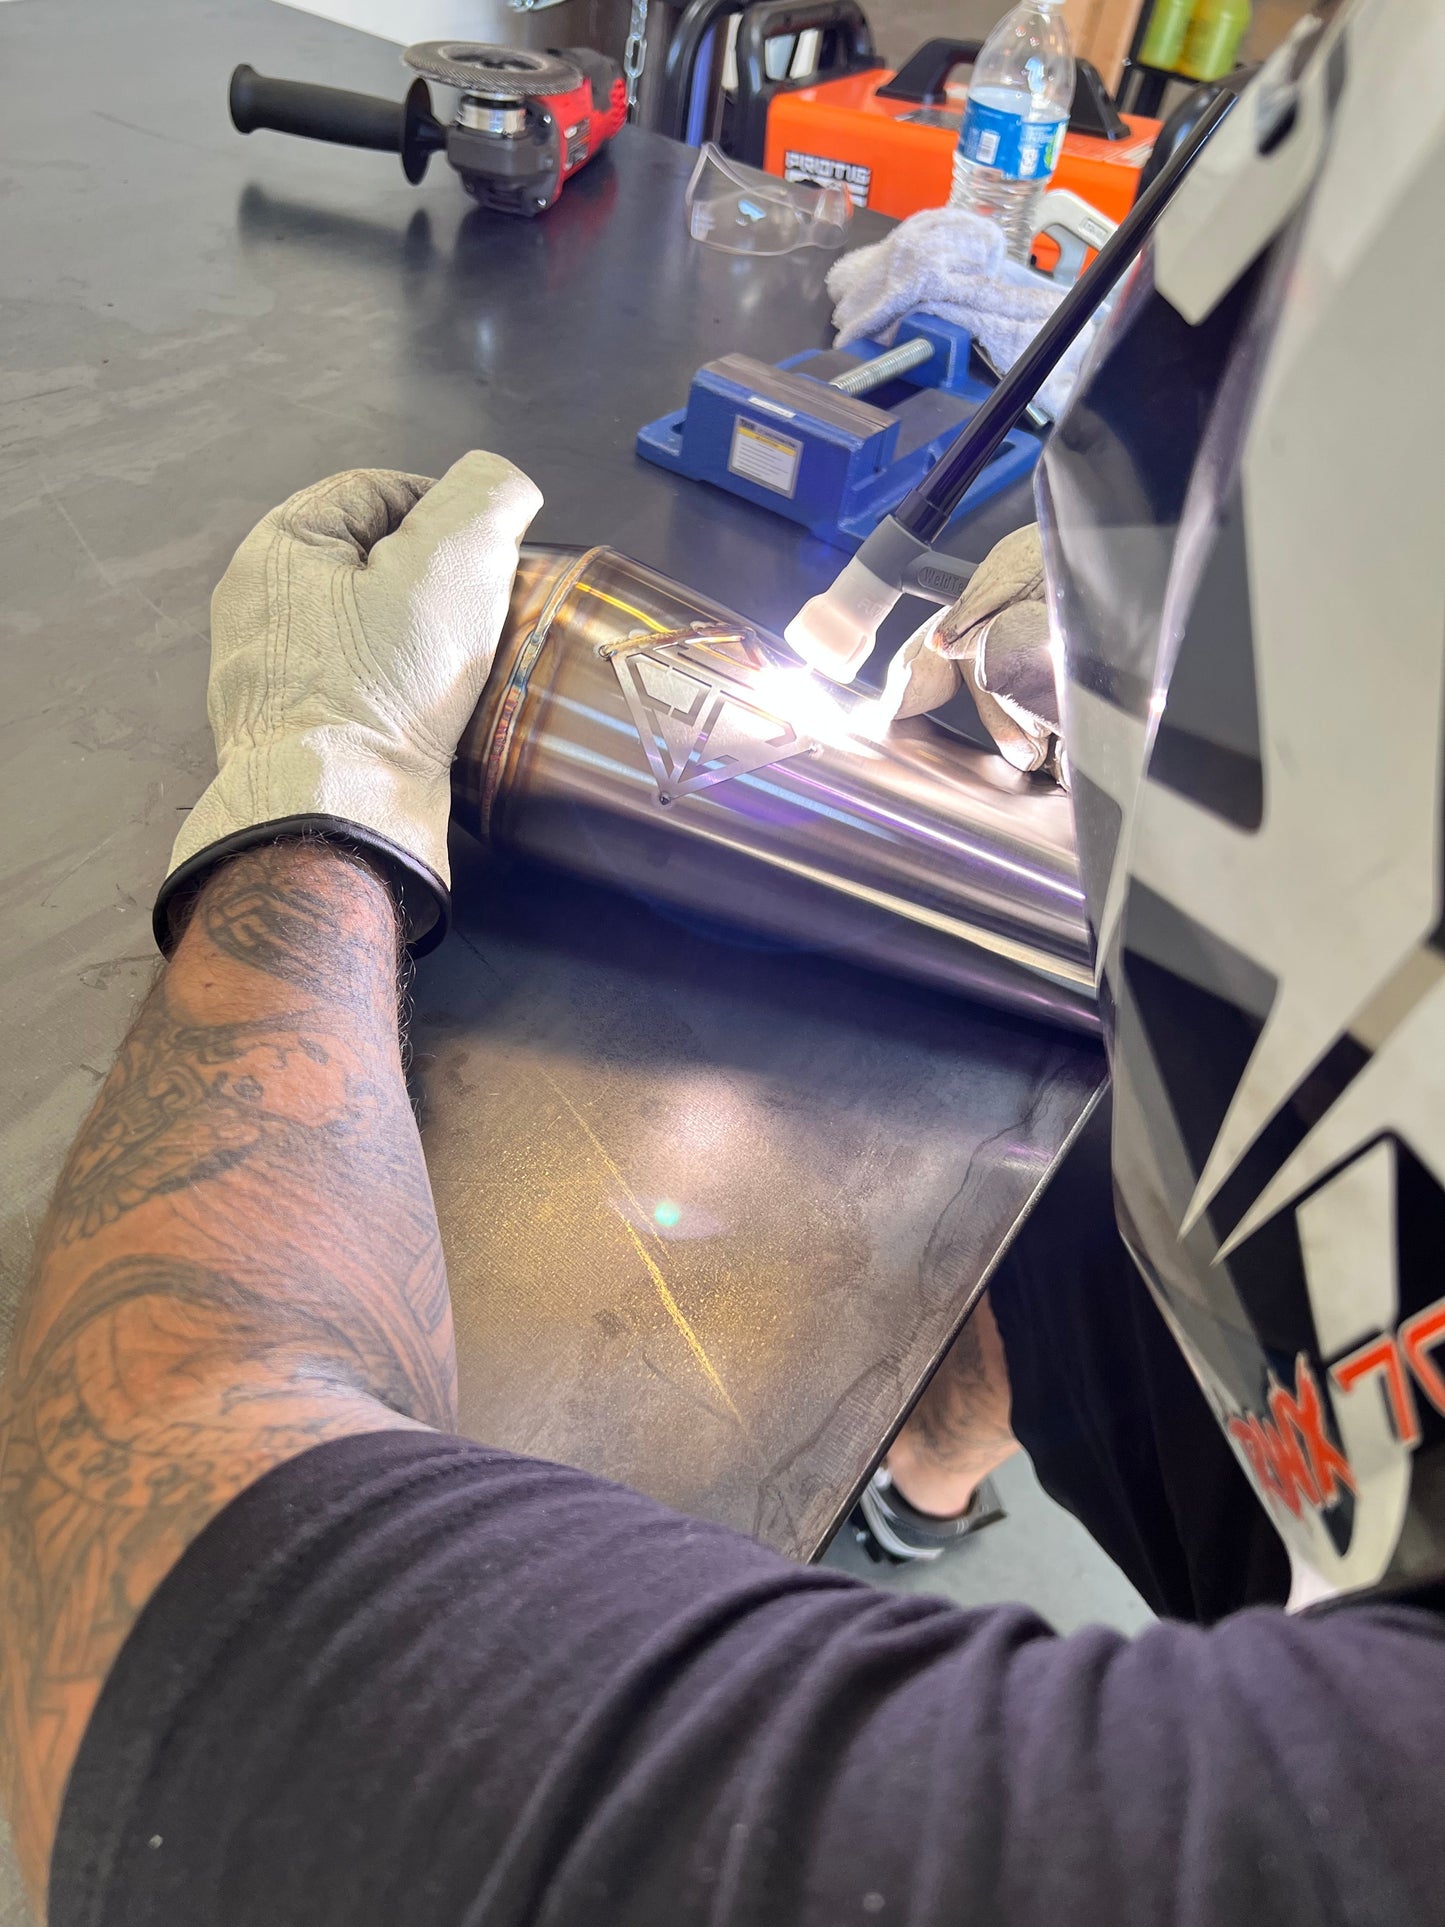 Tig welded Cutback Exhaust made for the Harley Davison TC Bagger